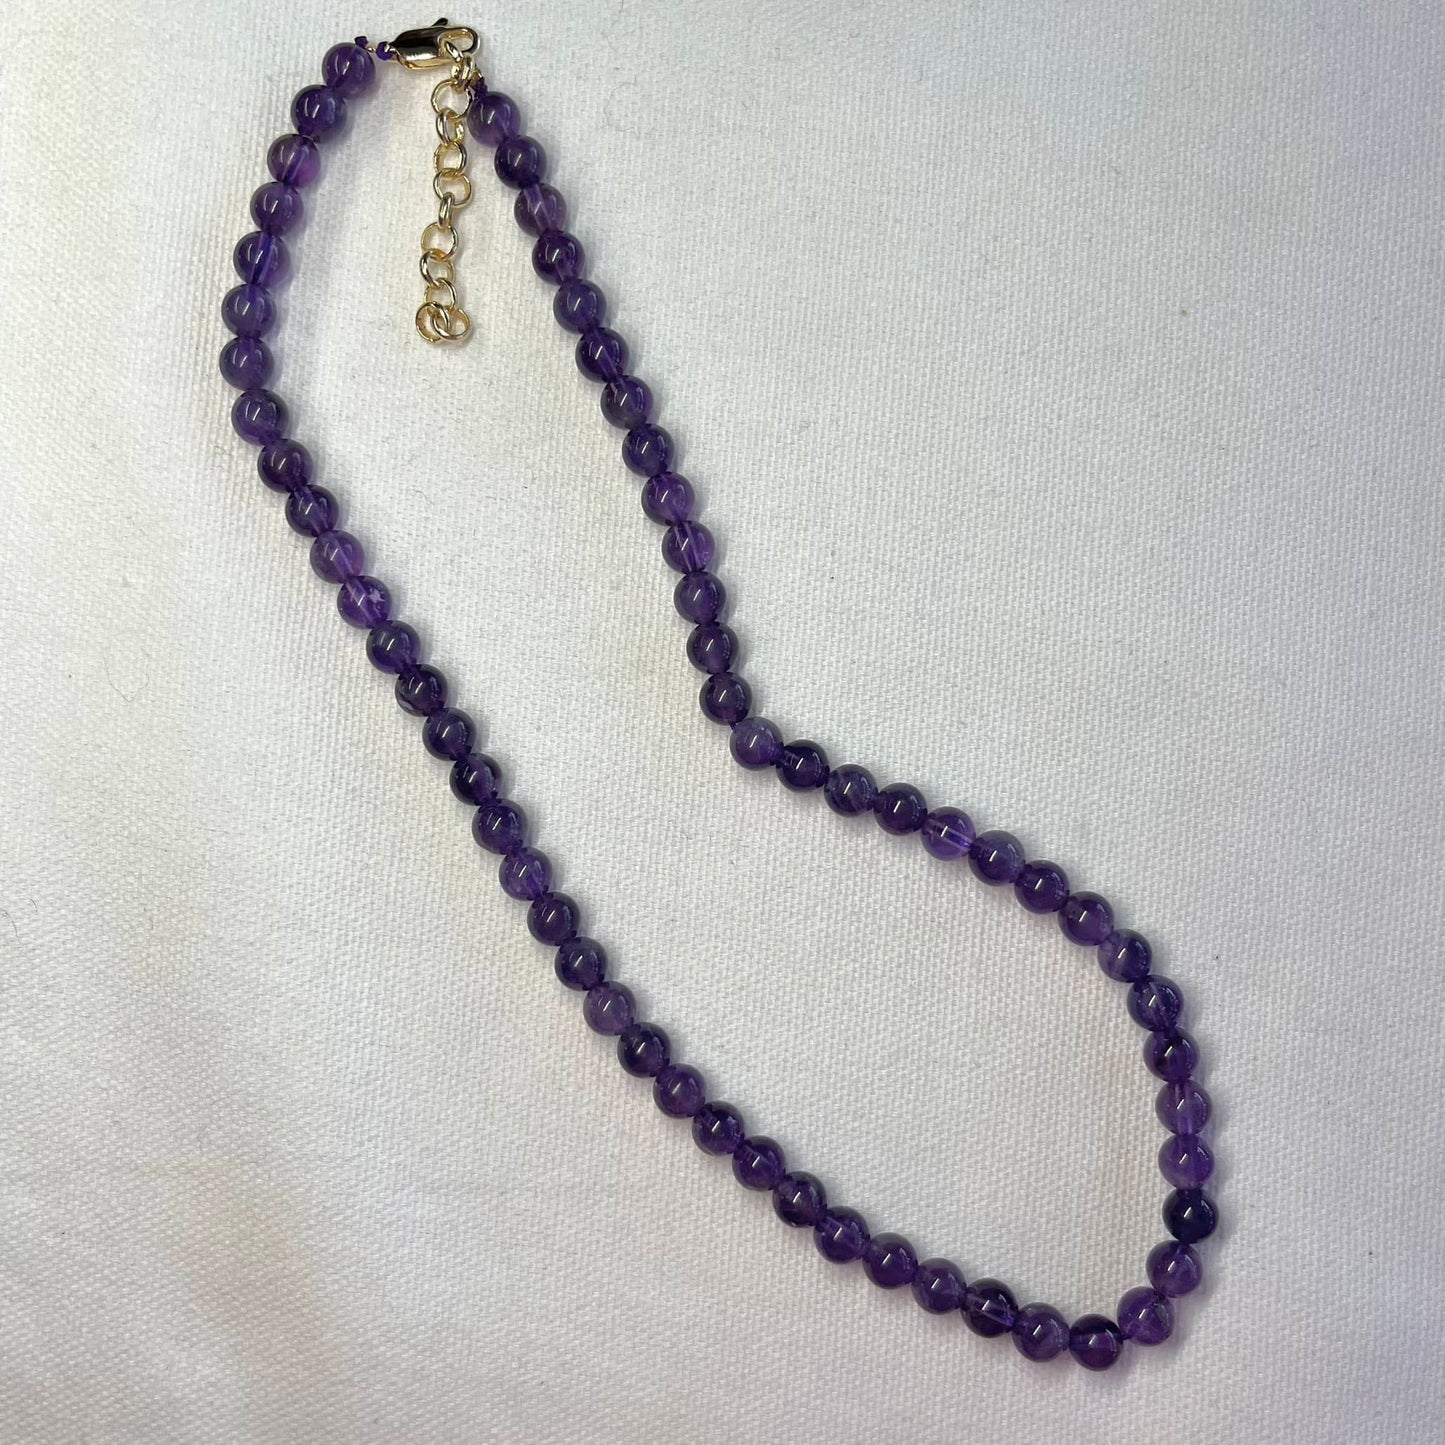 Higher Self Necklace - Amethyst